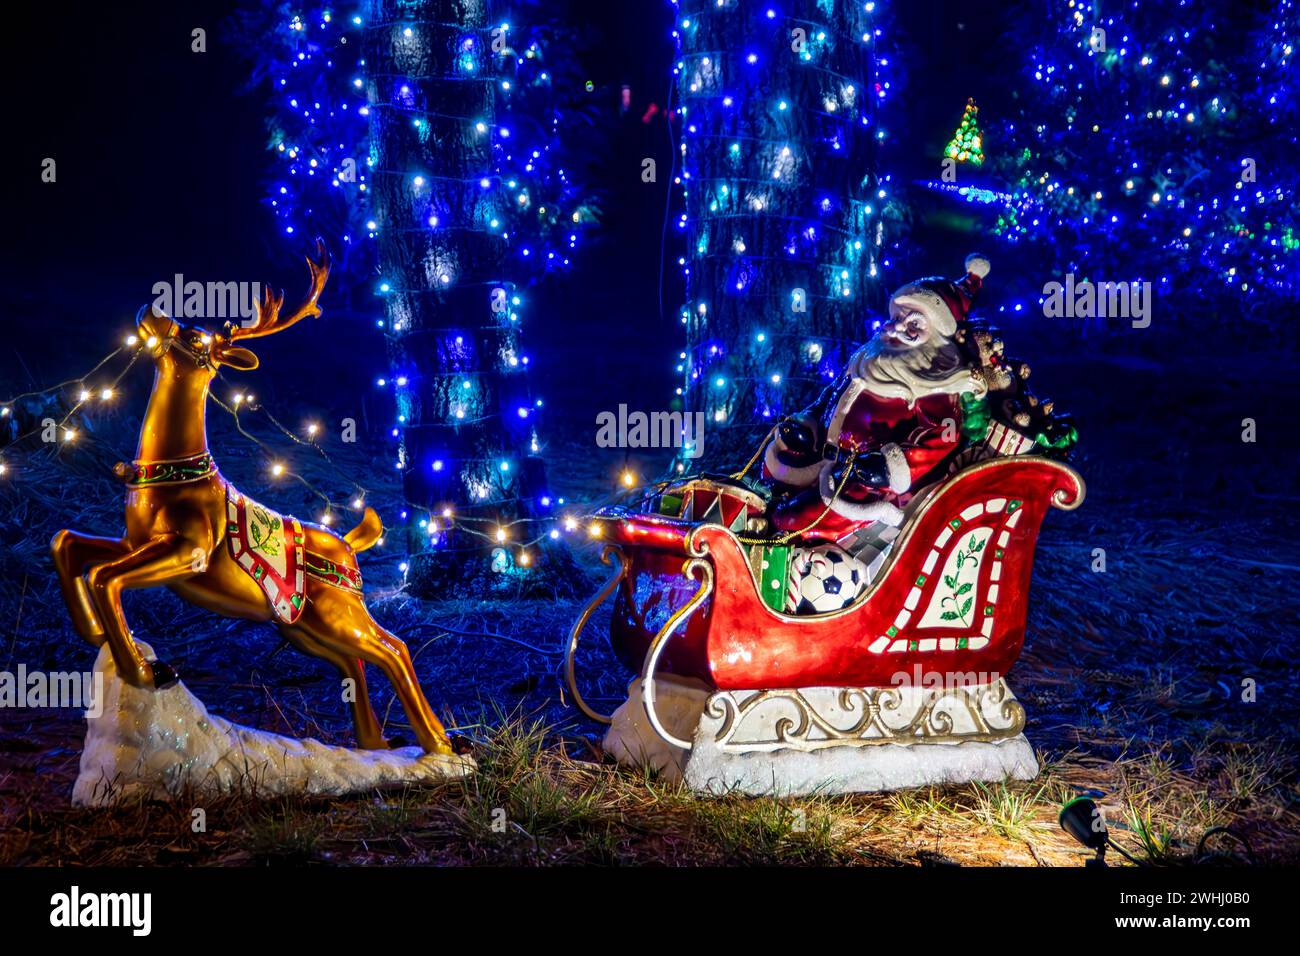 Colorful Nighttime Holiday Display Featuring A Lit Reindeer And Santa Claus In A Sleigh Decoration, Surrounded By Blue-Lit Trees And Festive Ornaments. Stock Photo